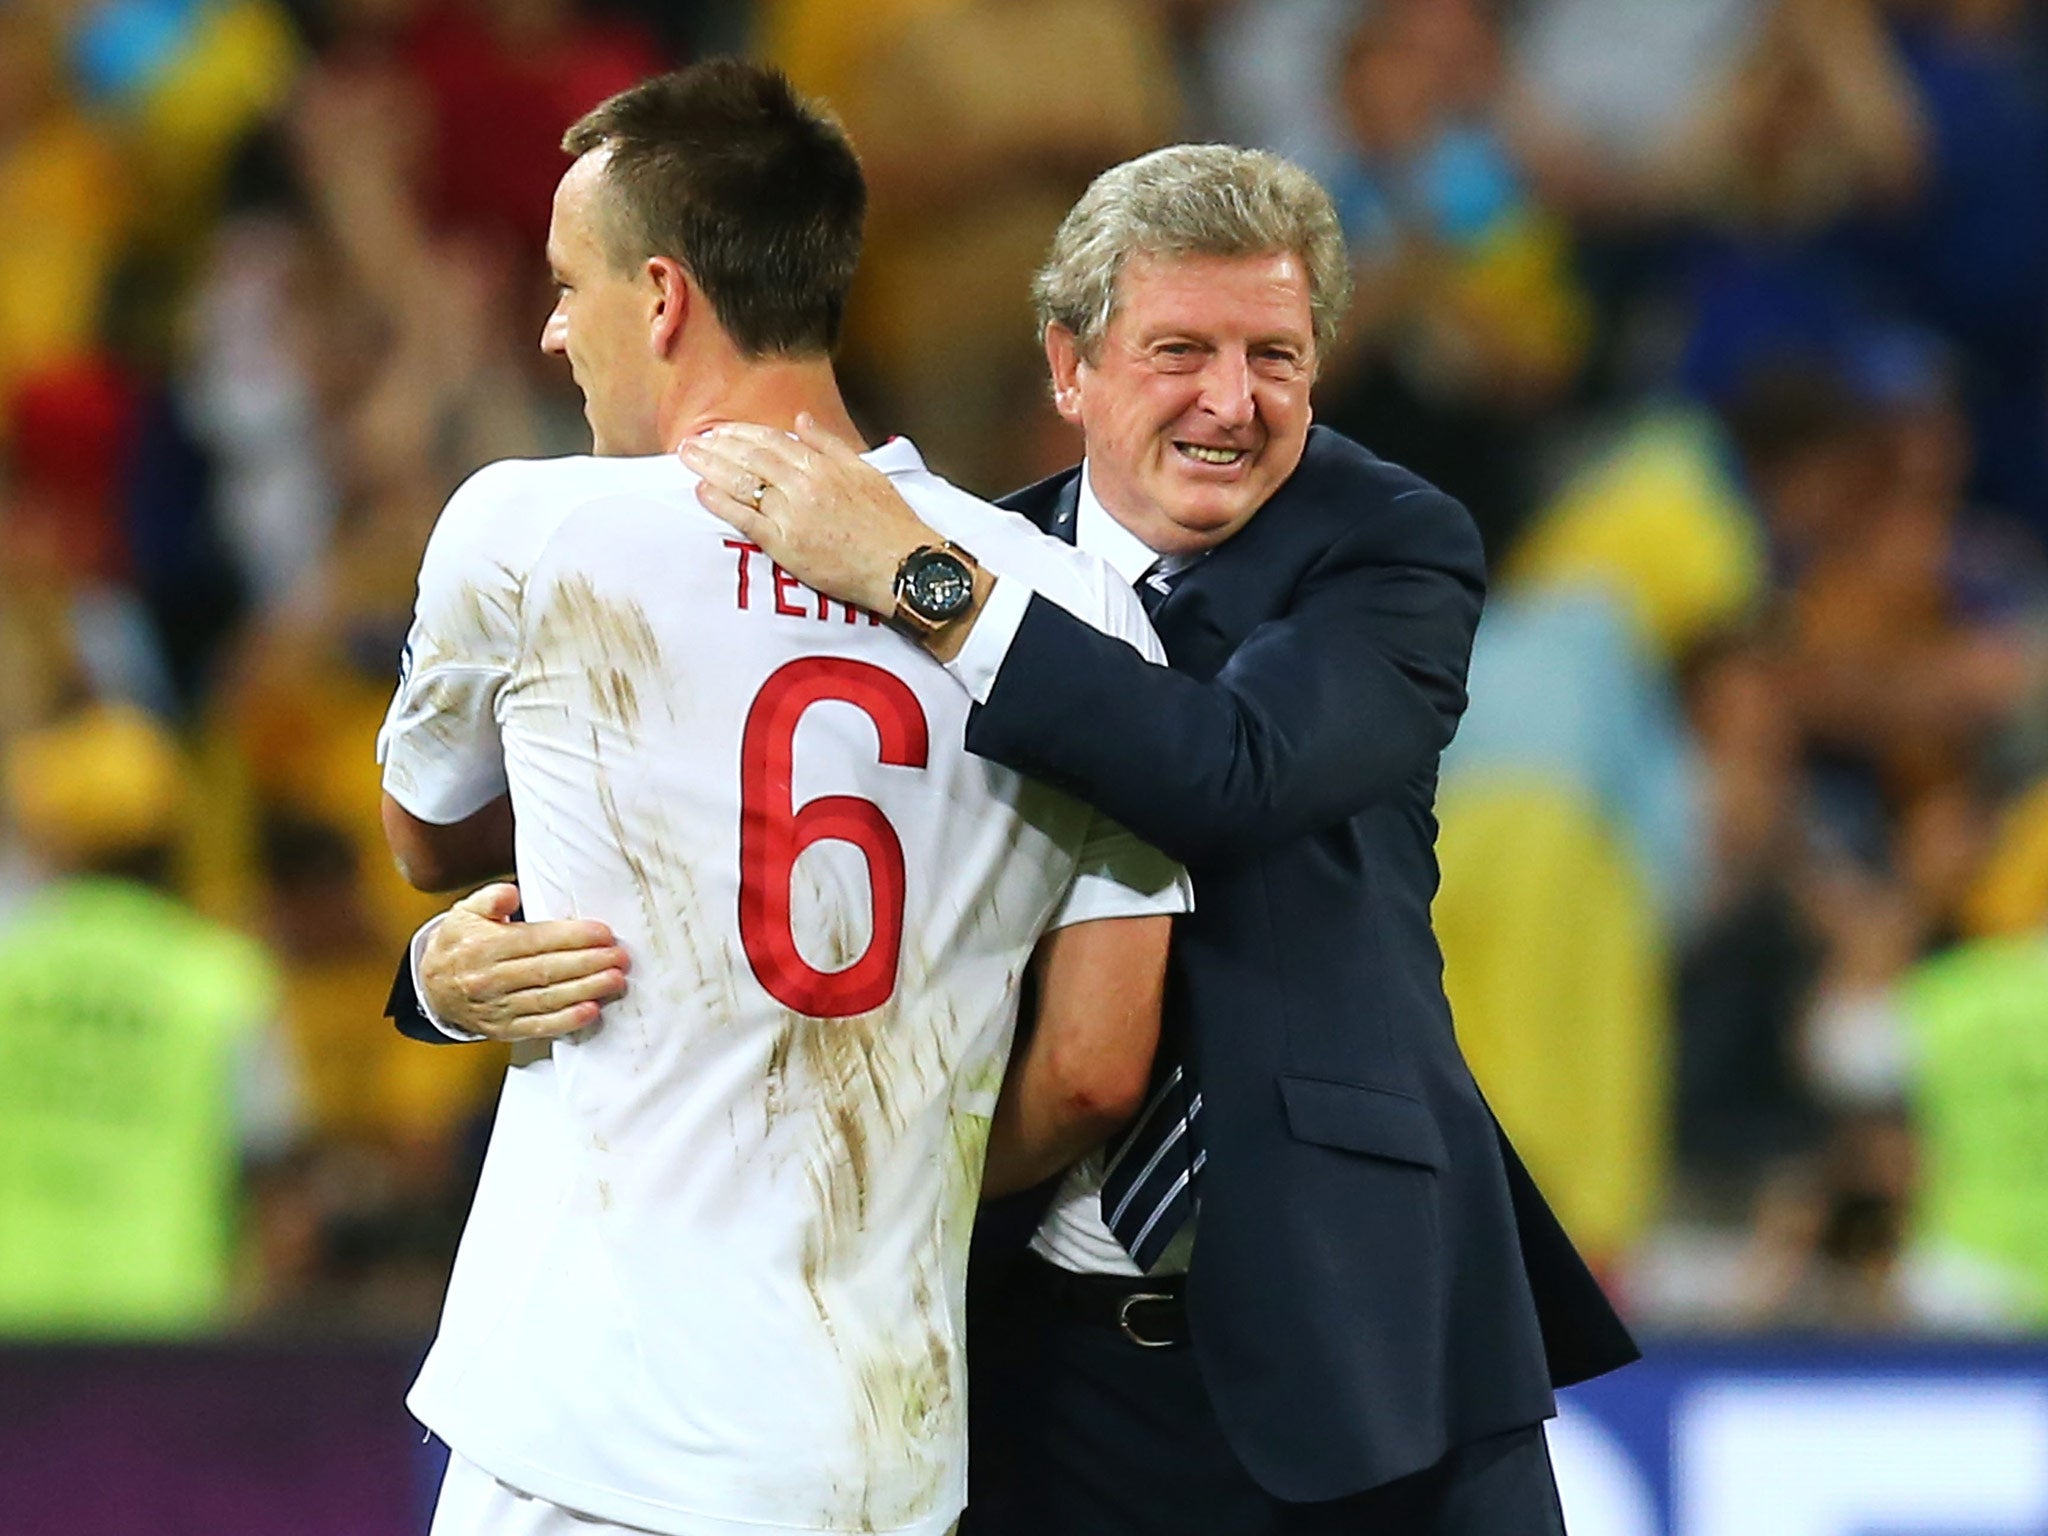 John Terry and Roy Hodgson pictured together at Euro 2012